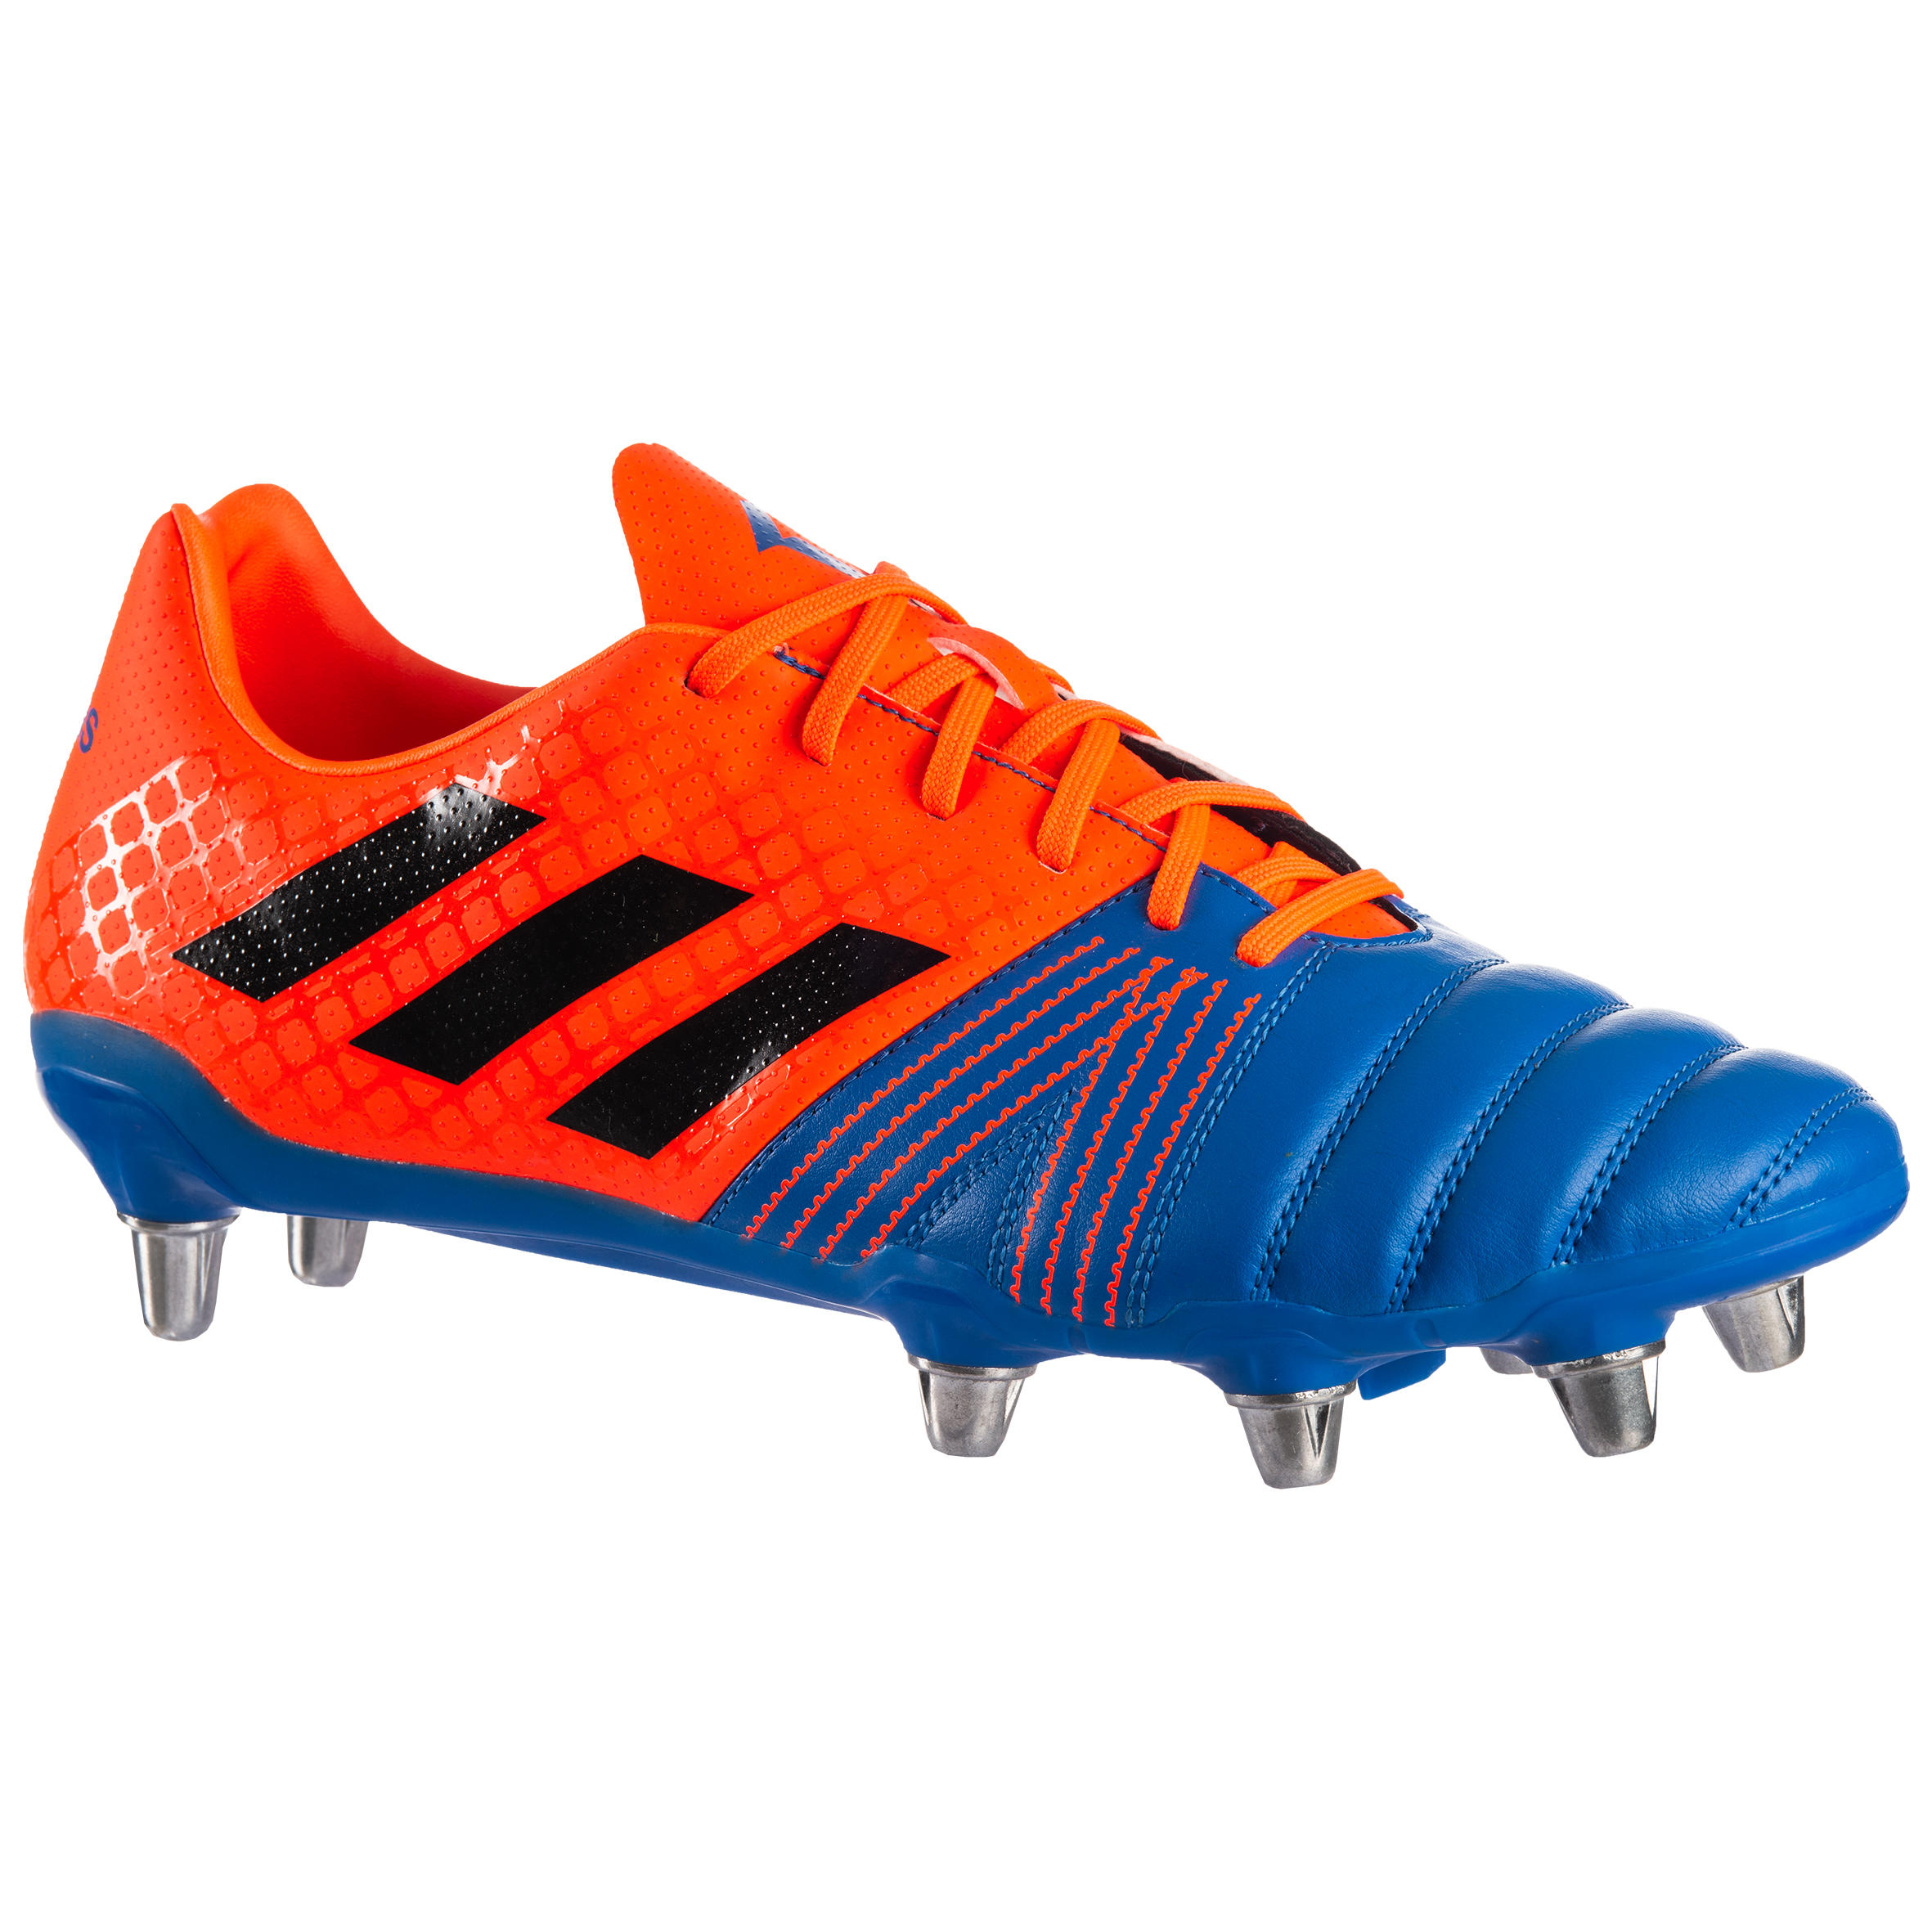 orange rugby boots